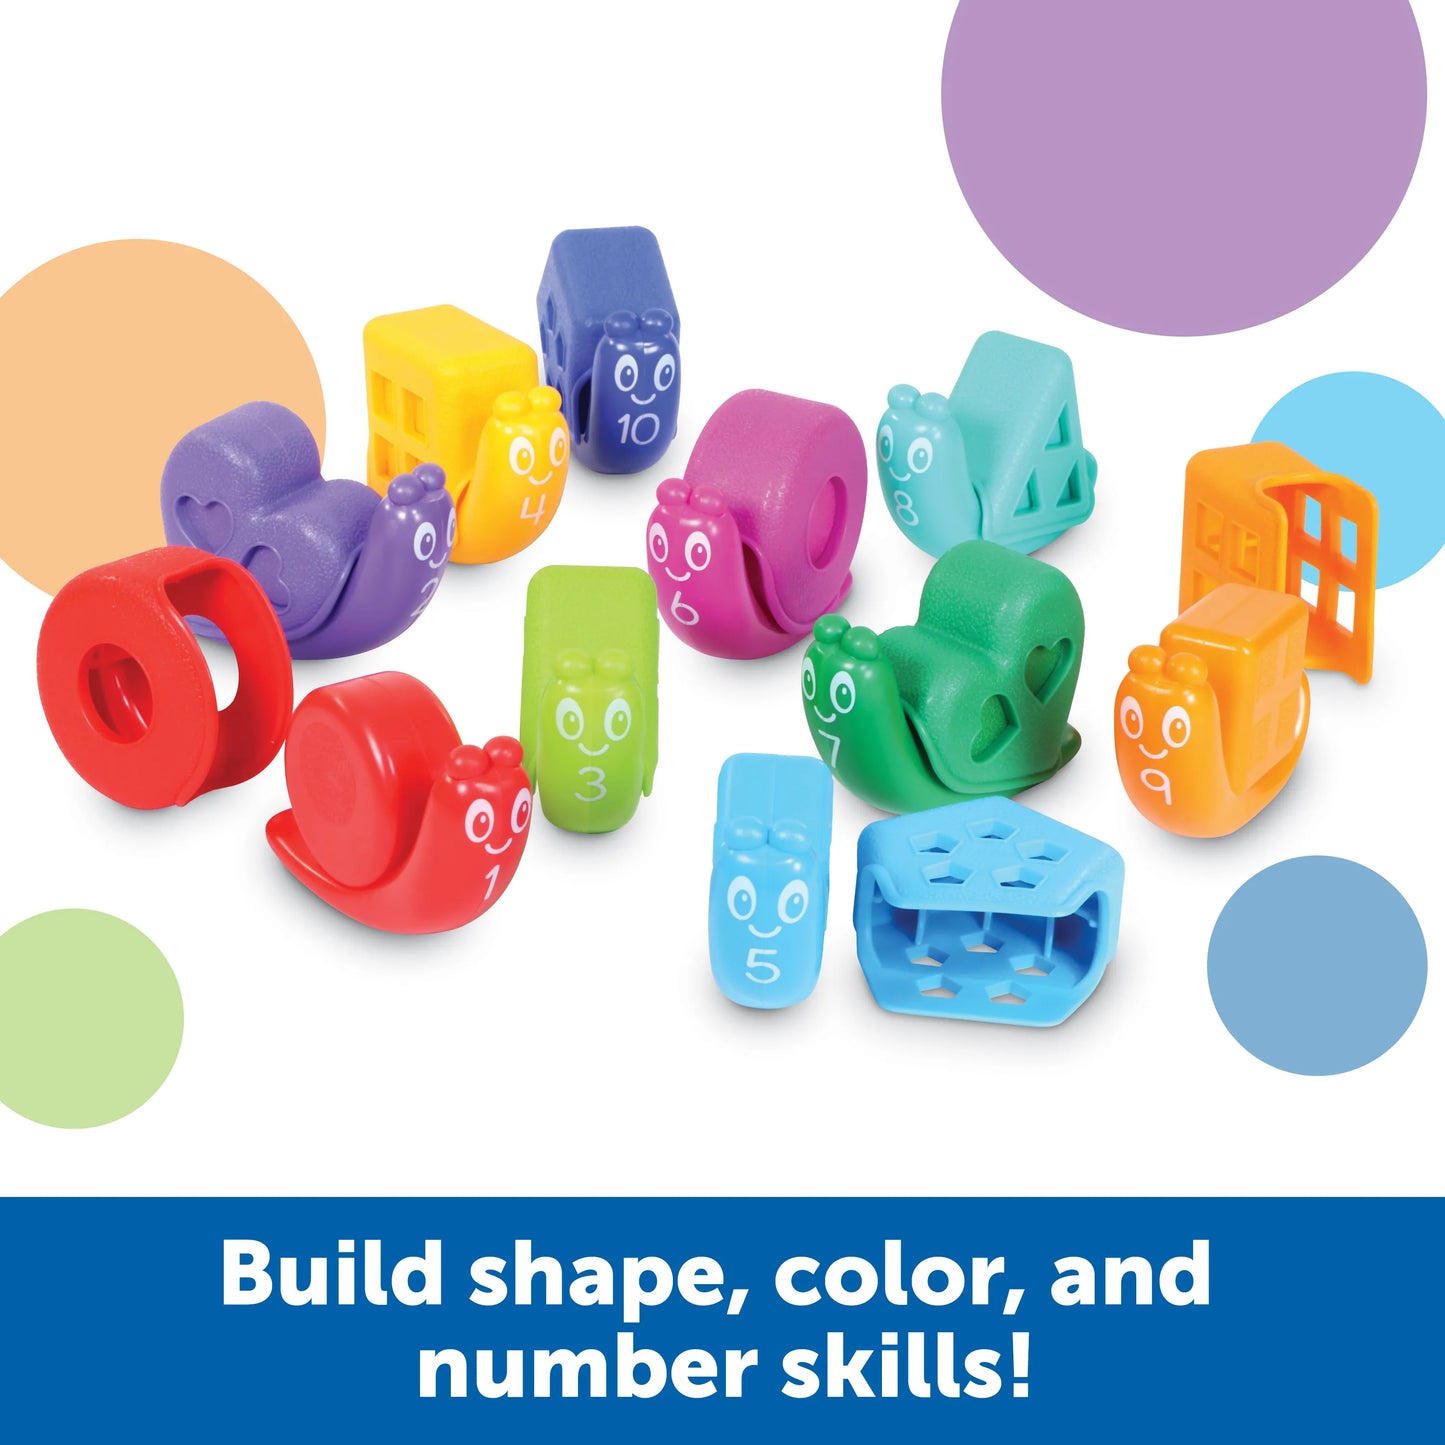 Learning Resources Snap-n-Learn Shape Snails